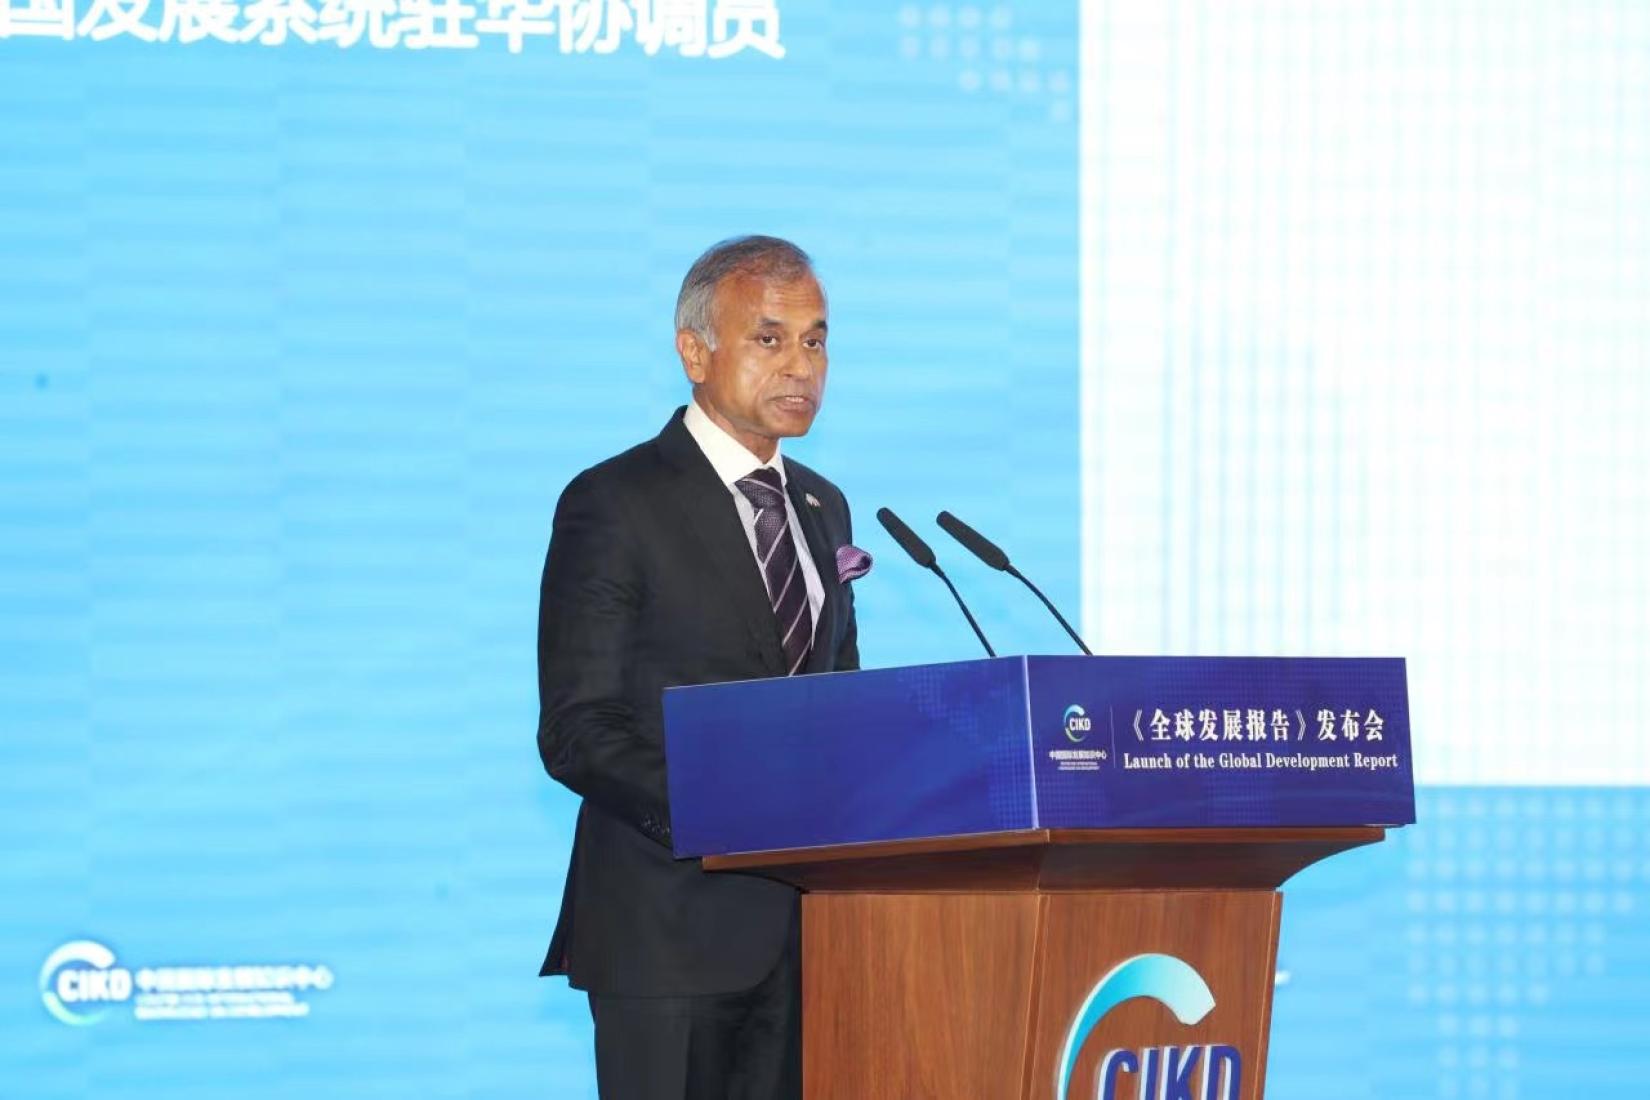 UN Resident Coordinator in China Siddharth Chatterjee at Launch of the Global Development Report 